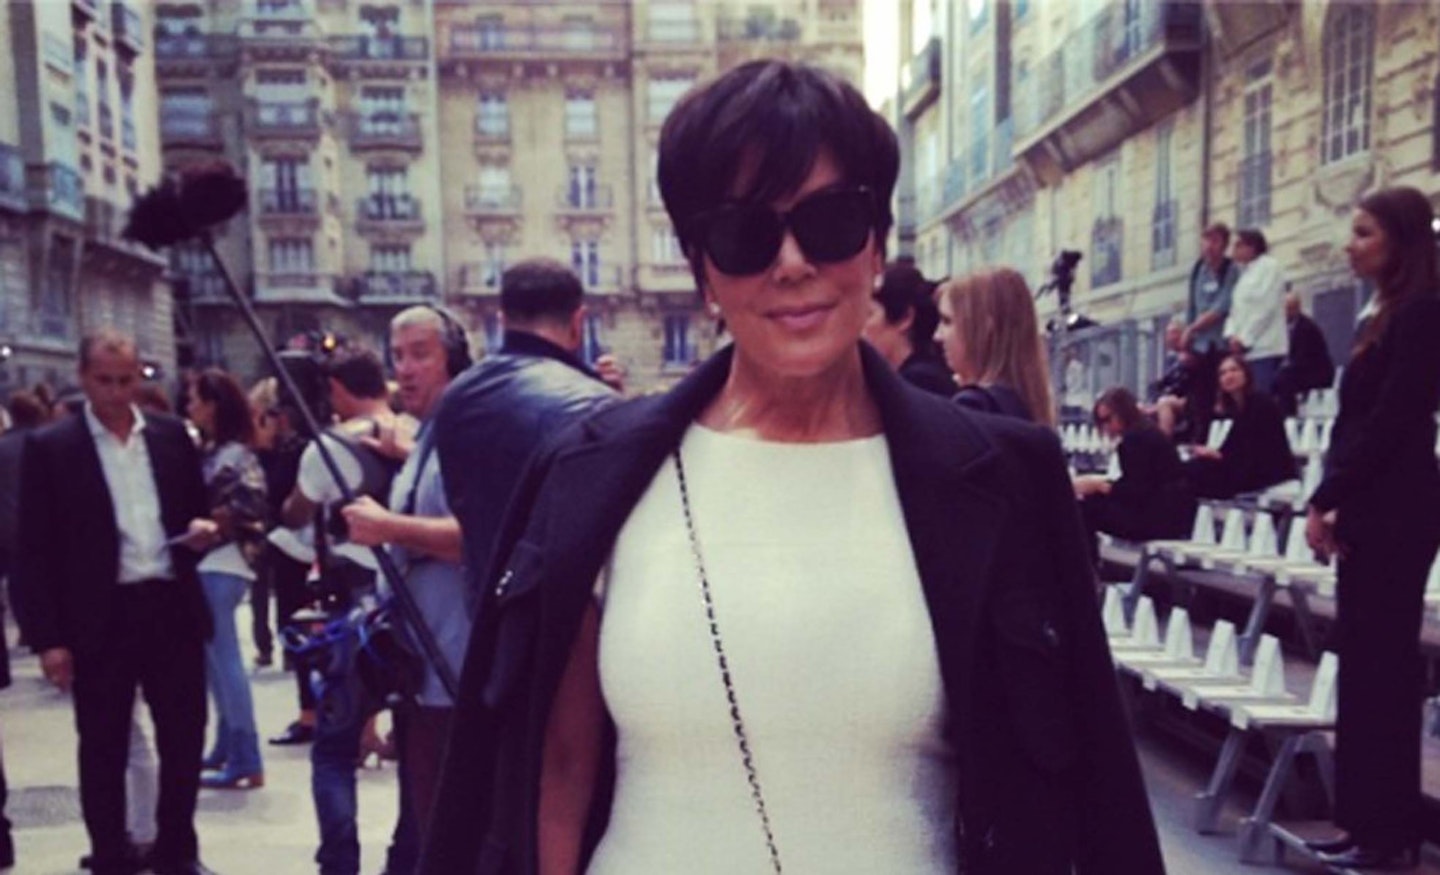 @Grazia_Live: Look who we've just bumped into - it's only Kris Jenner!